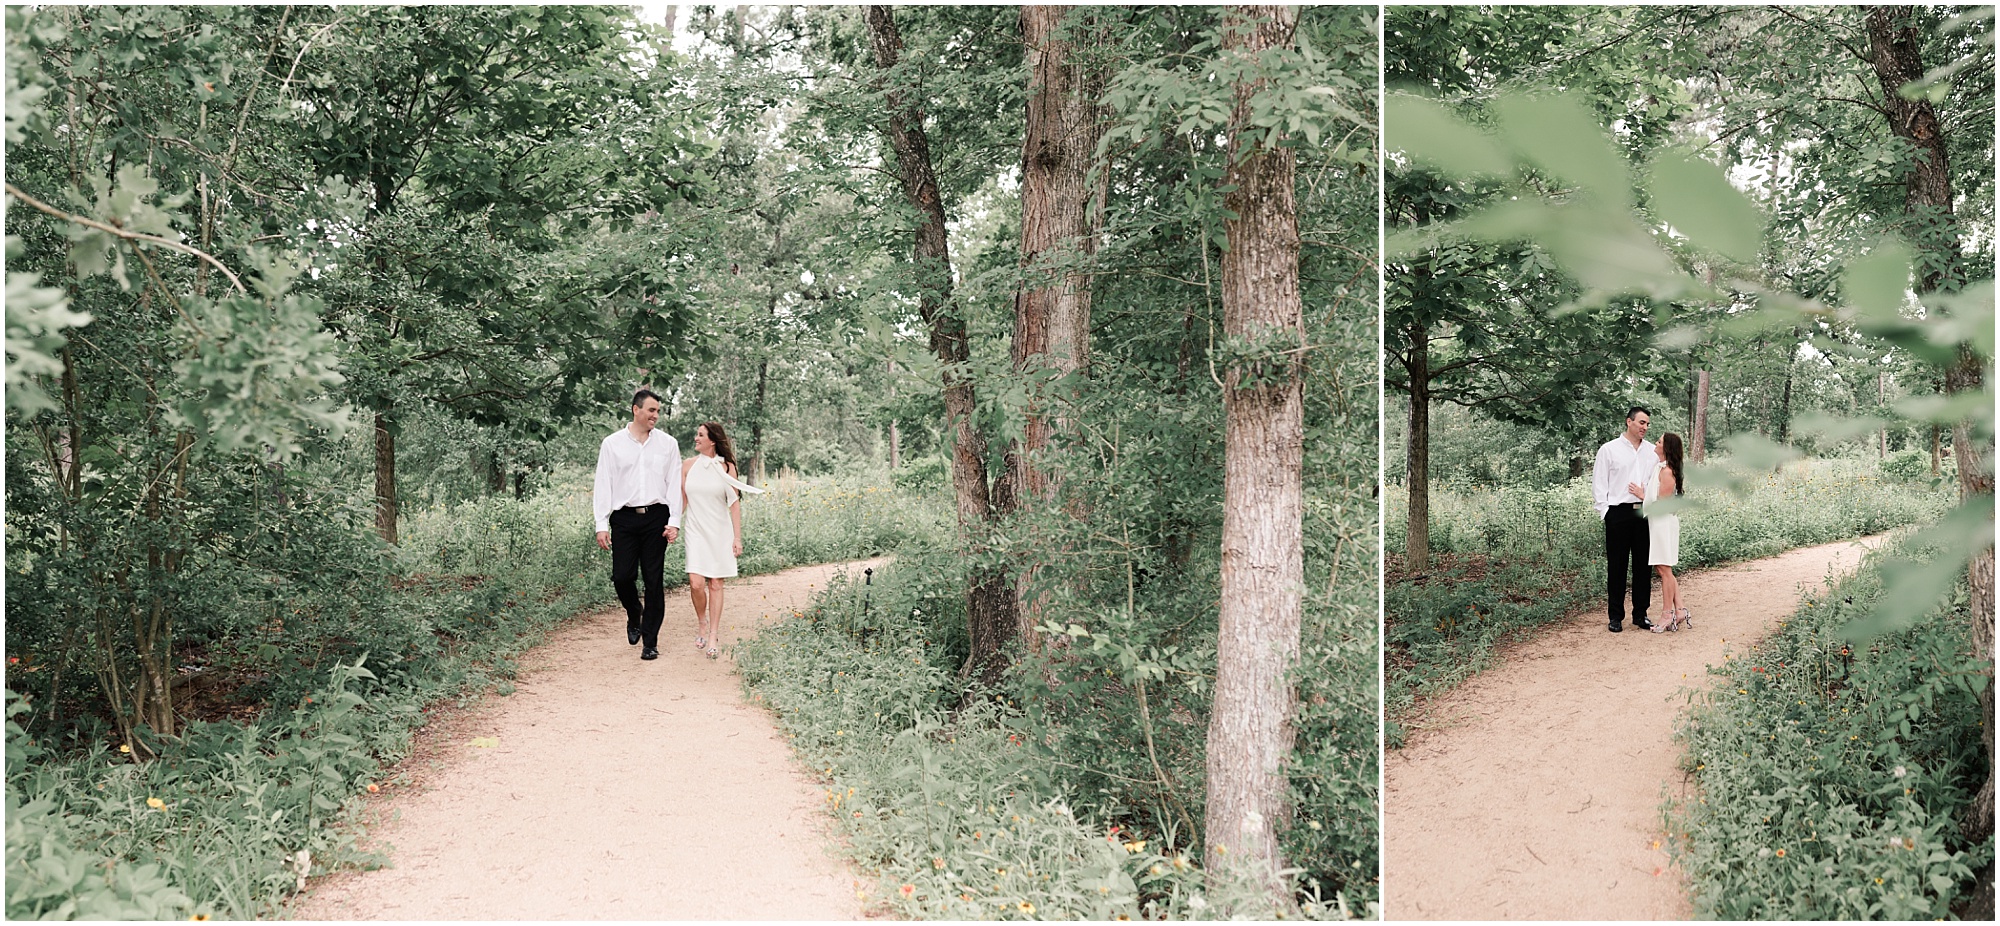 elegant engagement session at Houston Arboretum in Houston, Texas photographed by Swish and Click Photography